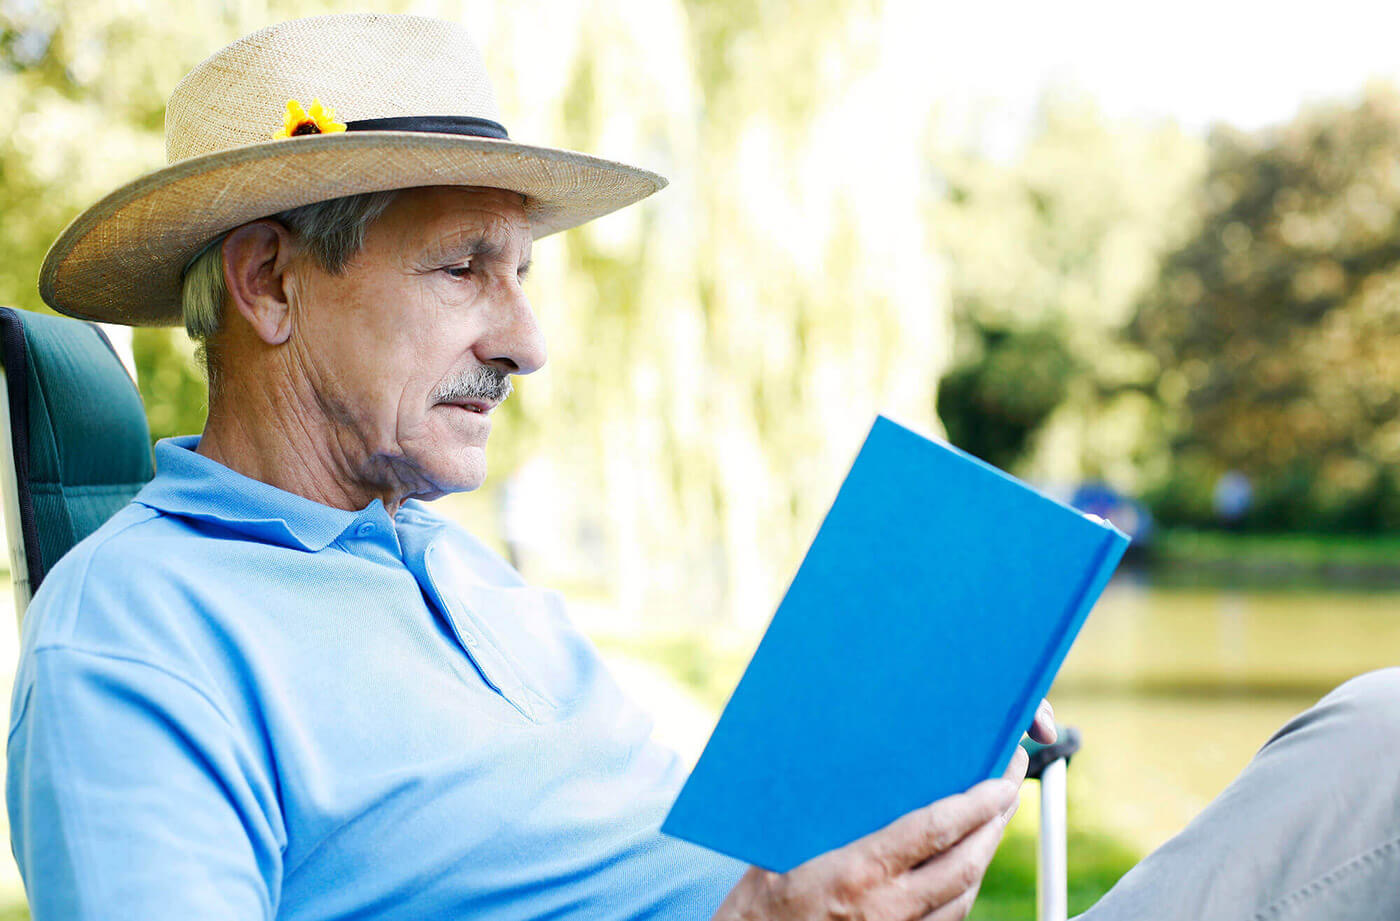 Top 5 Memory Care Activities To Practice With Seniors